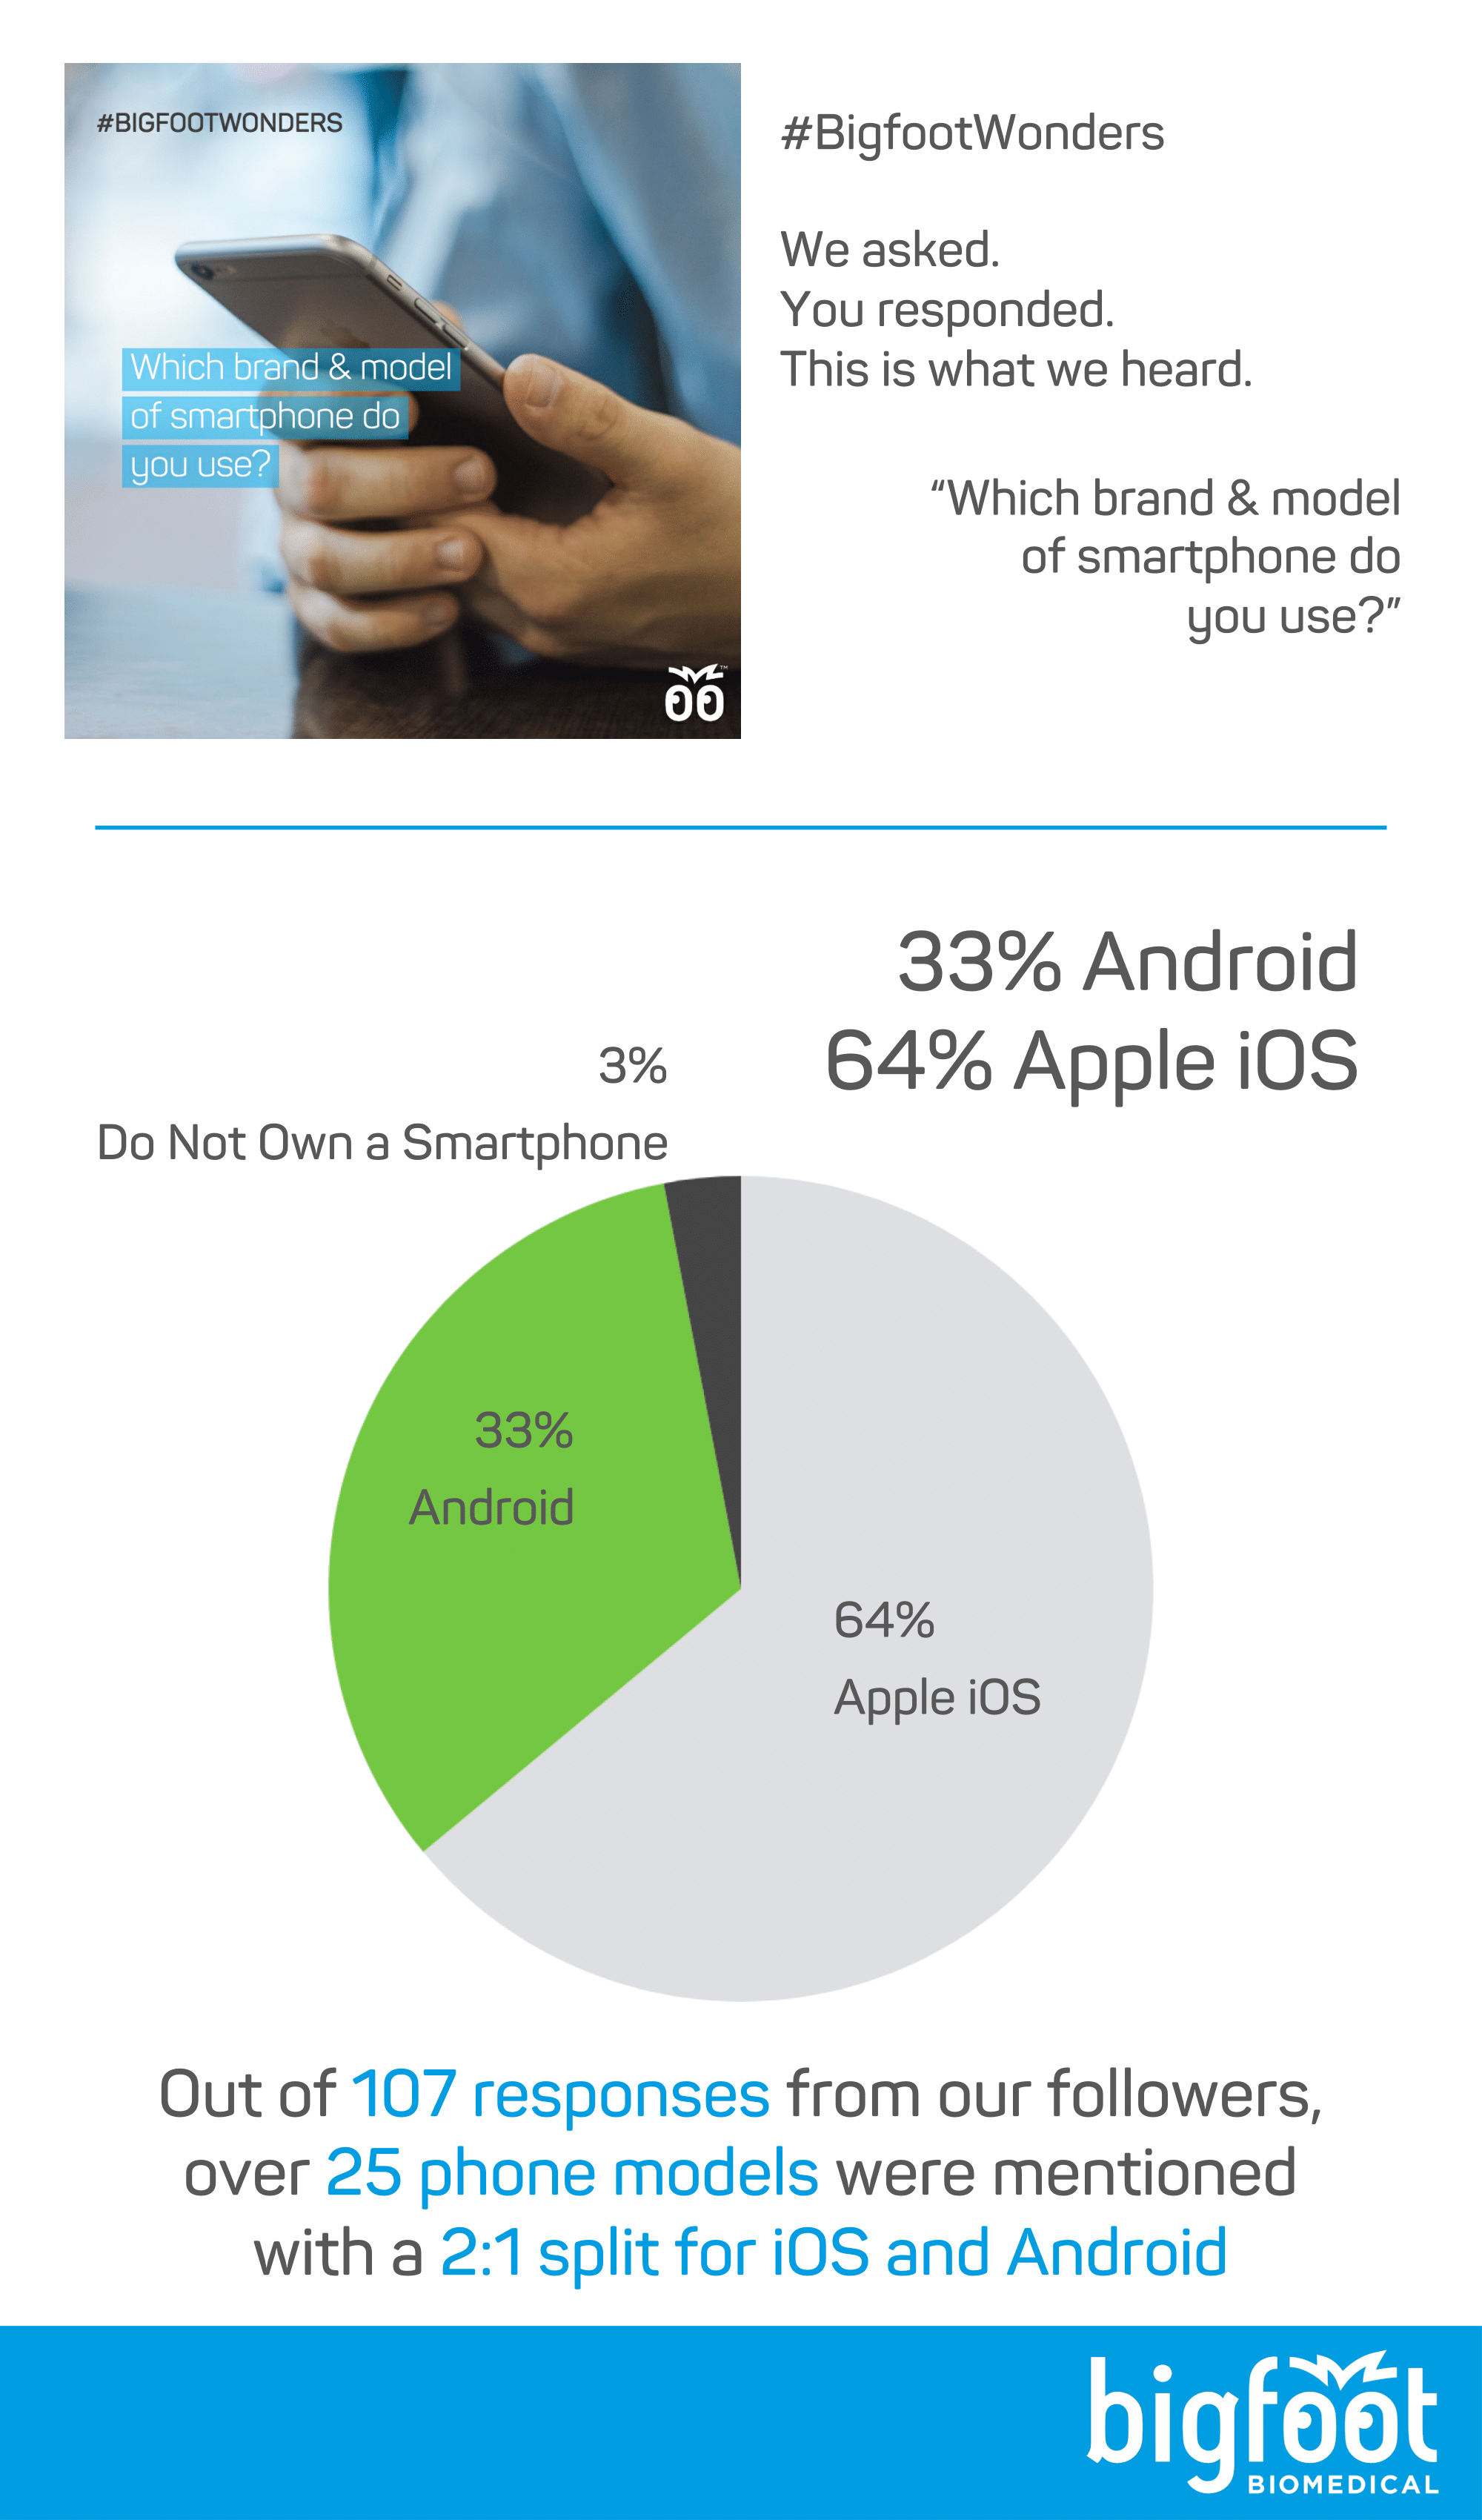 Of 107 responses, over 25 models of phone were mentioned, with a 2:1 split for iOS vs Android, 64% Apple, 33% Android, 3% flip phone or no smartphone at all